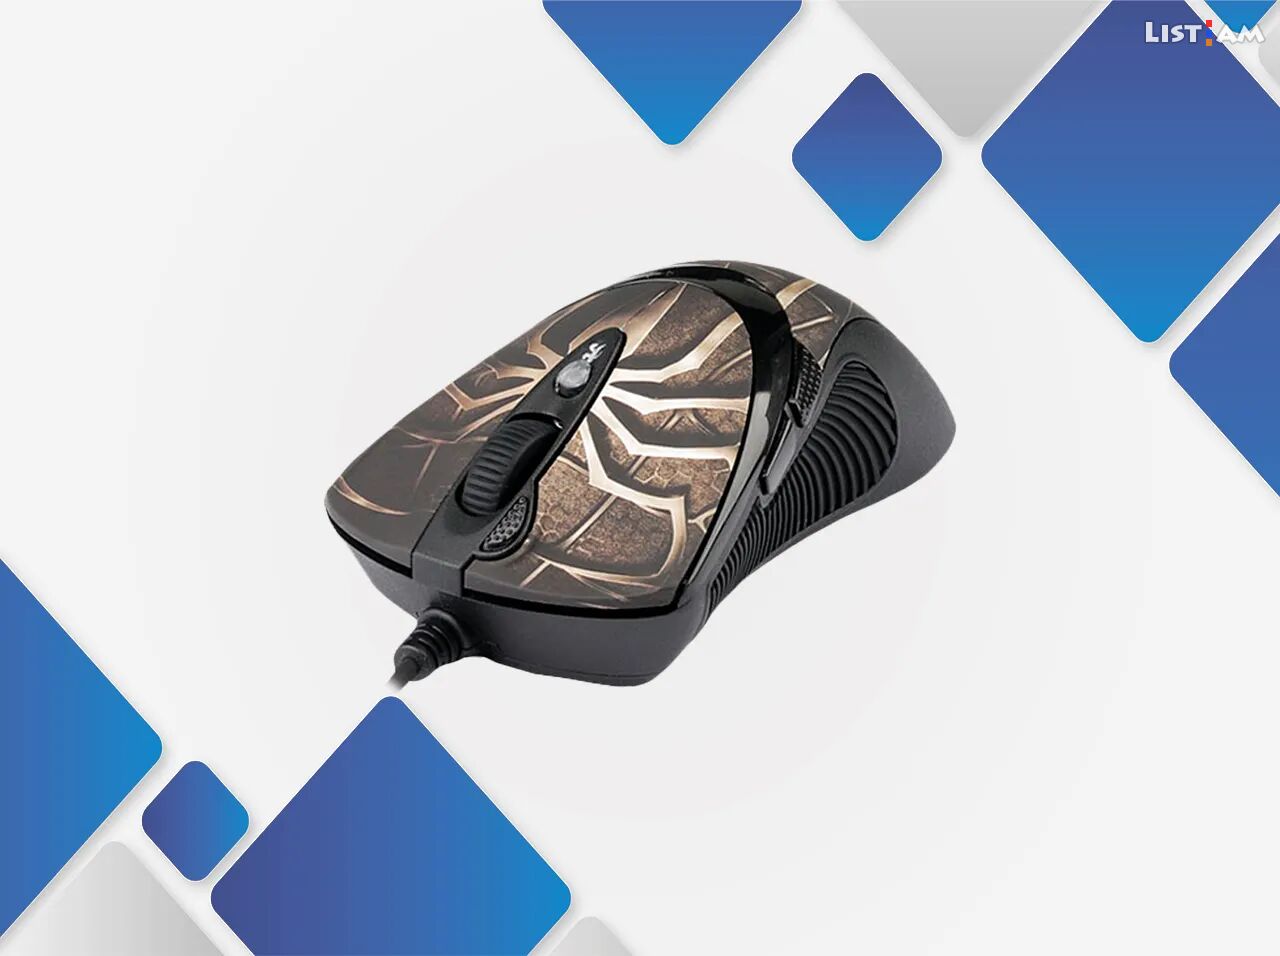 Gaming Mouse,